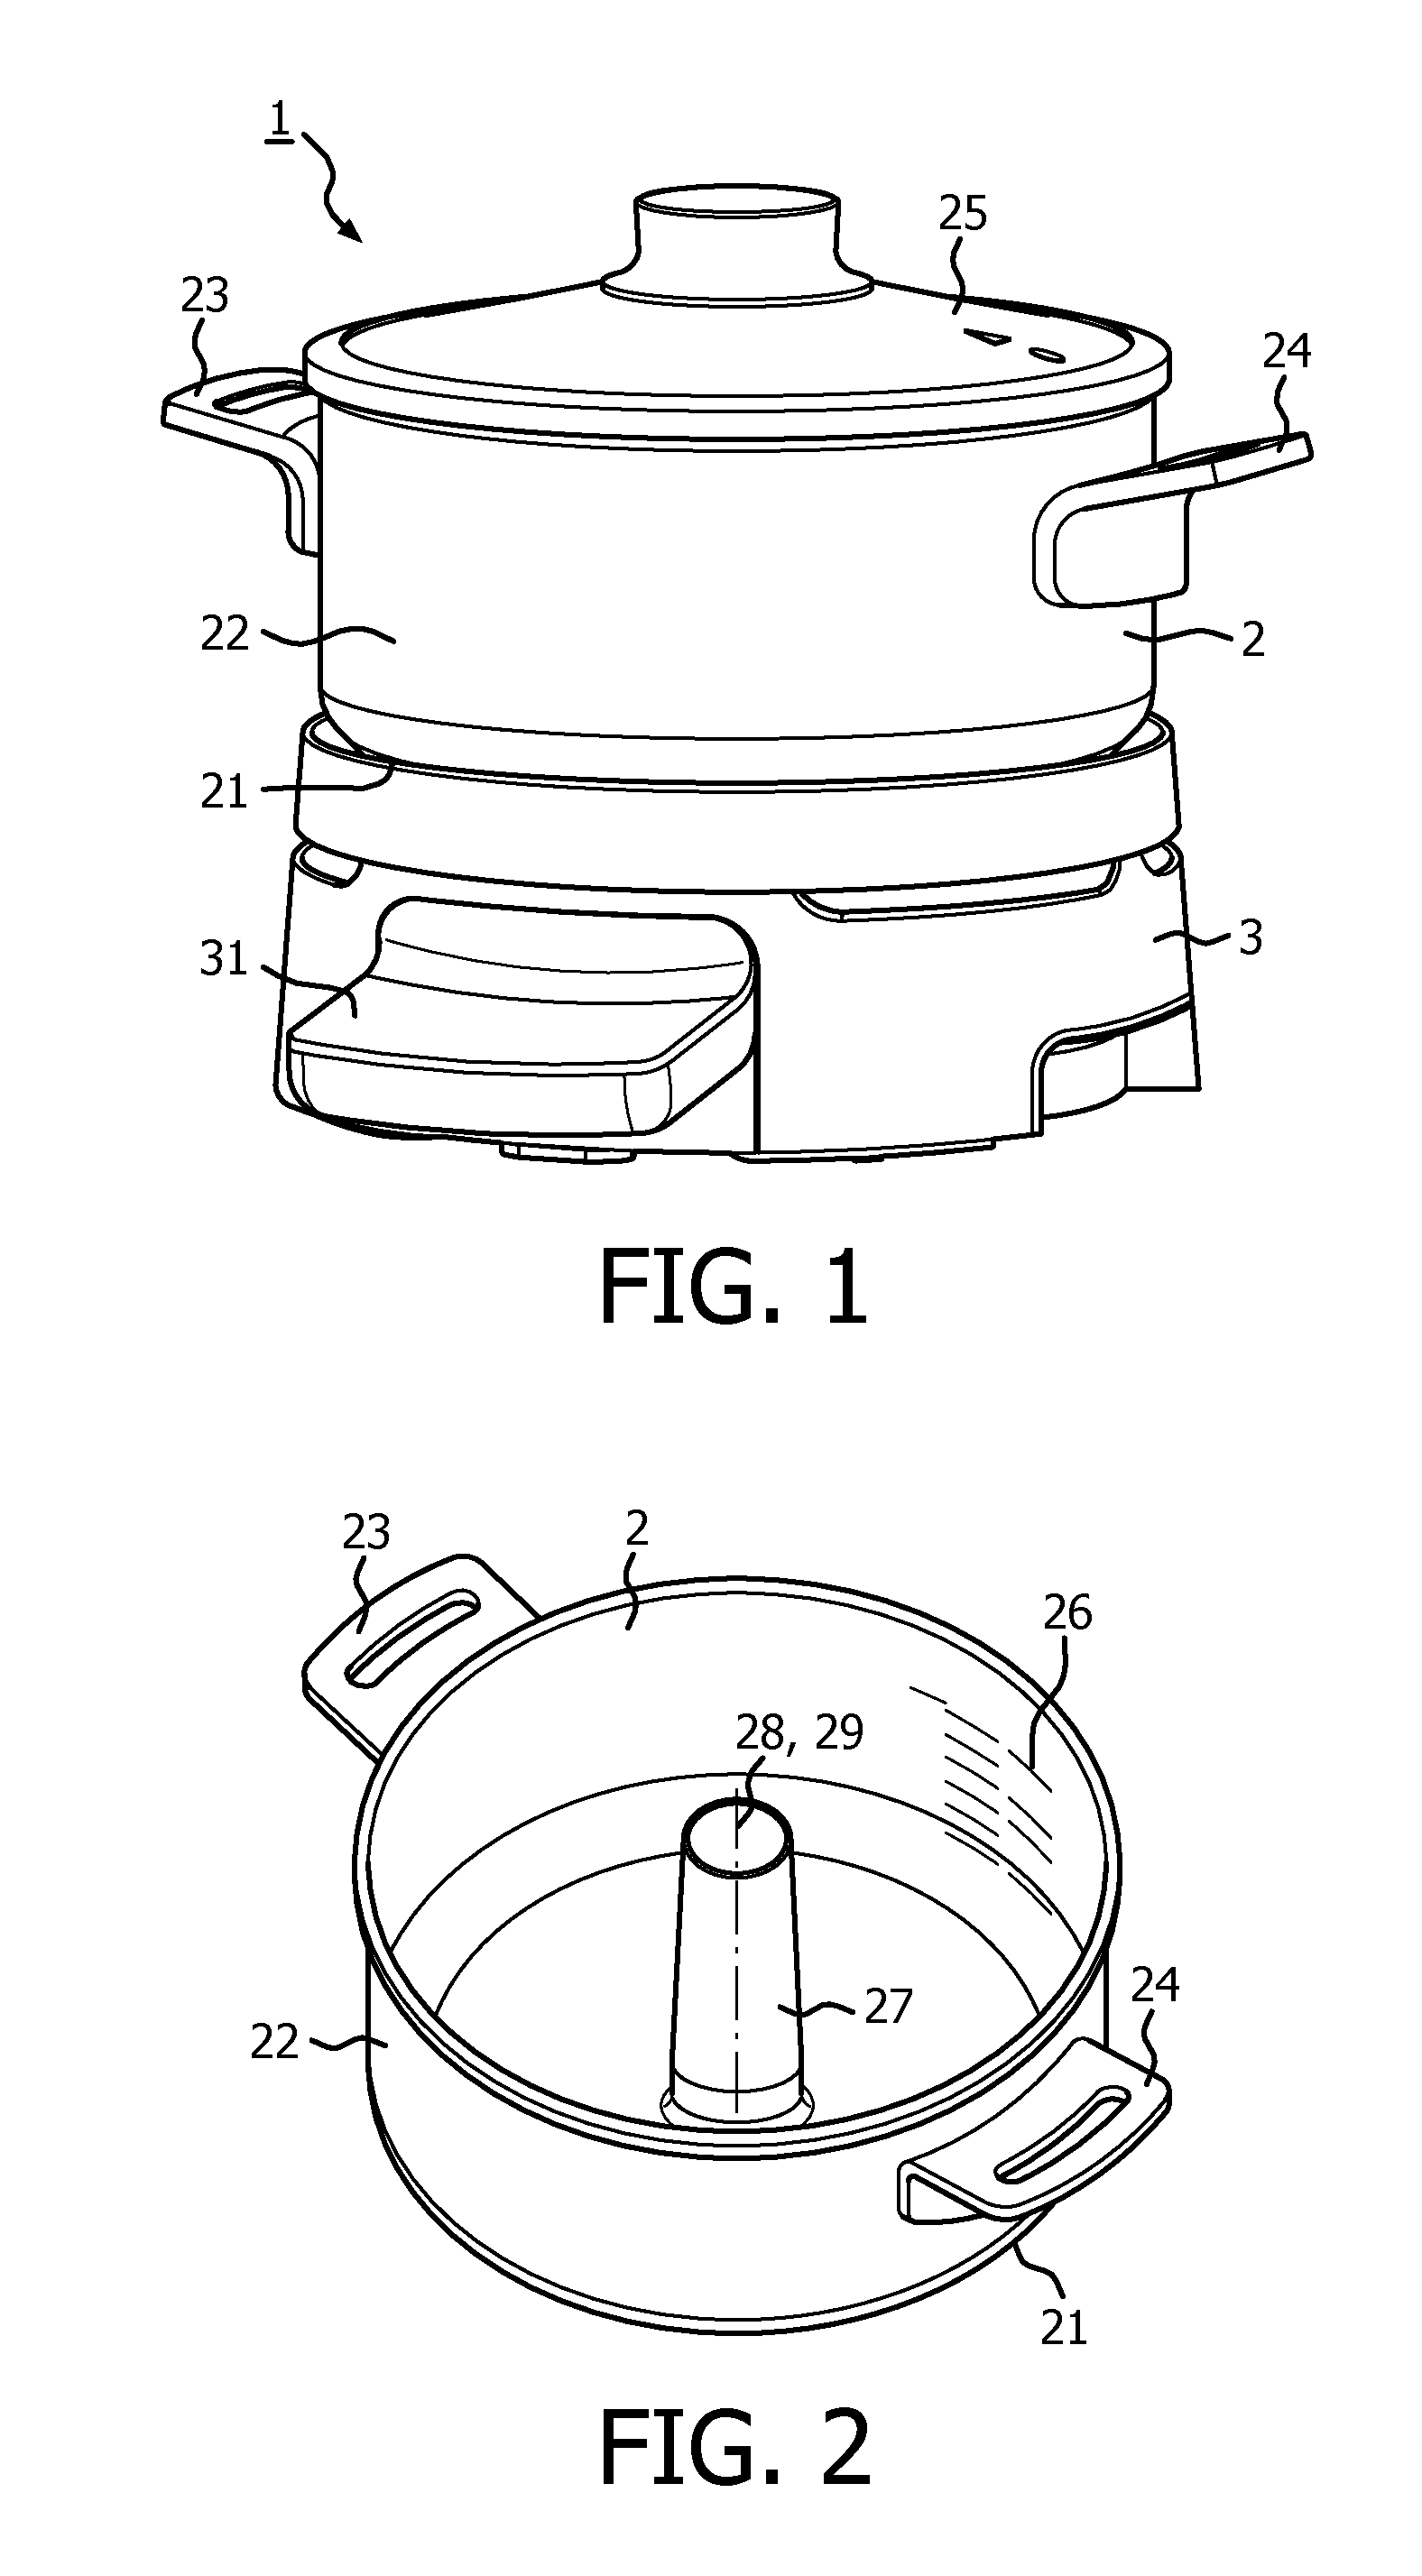 Appliance for preparing food